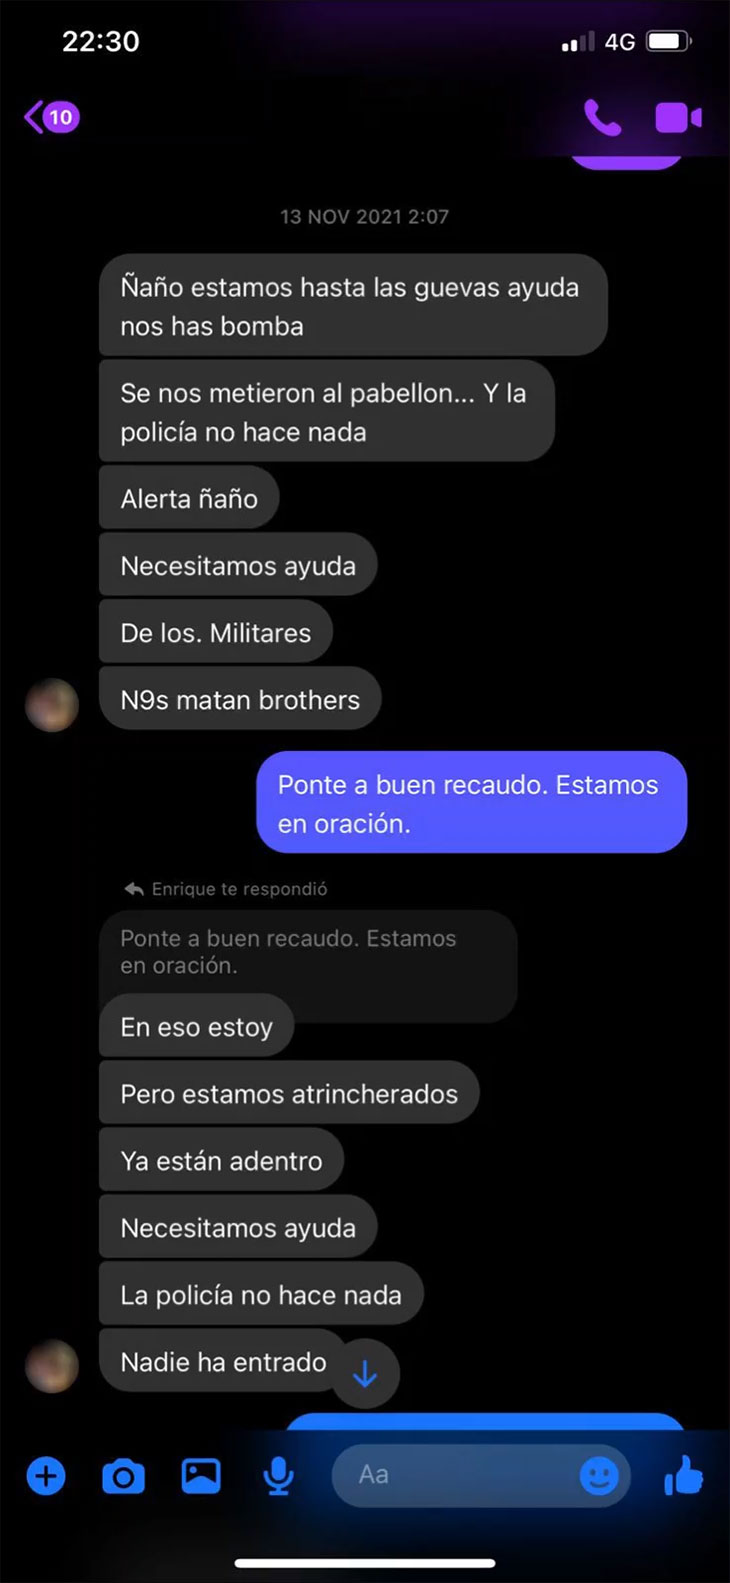 Cellphone screen of chat messages in Spanish